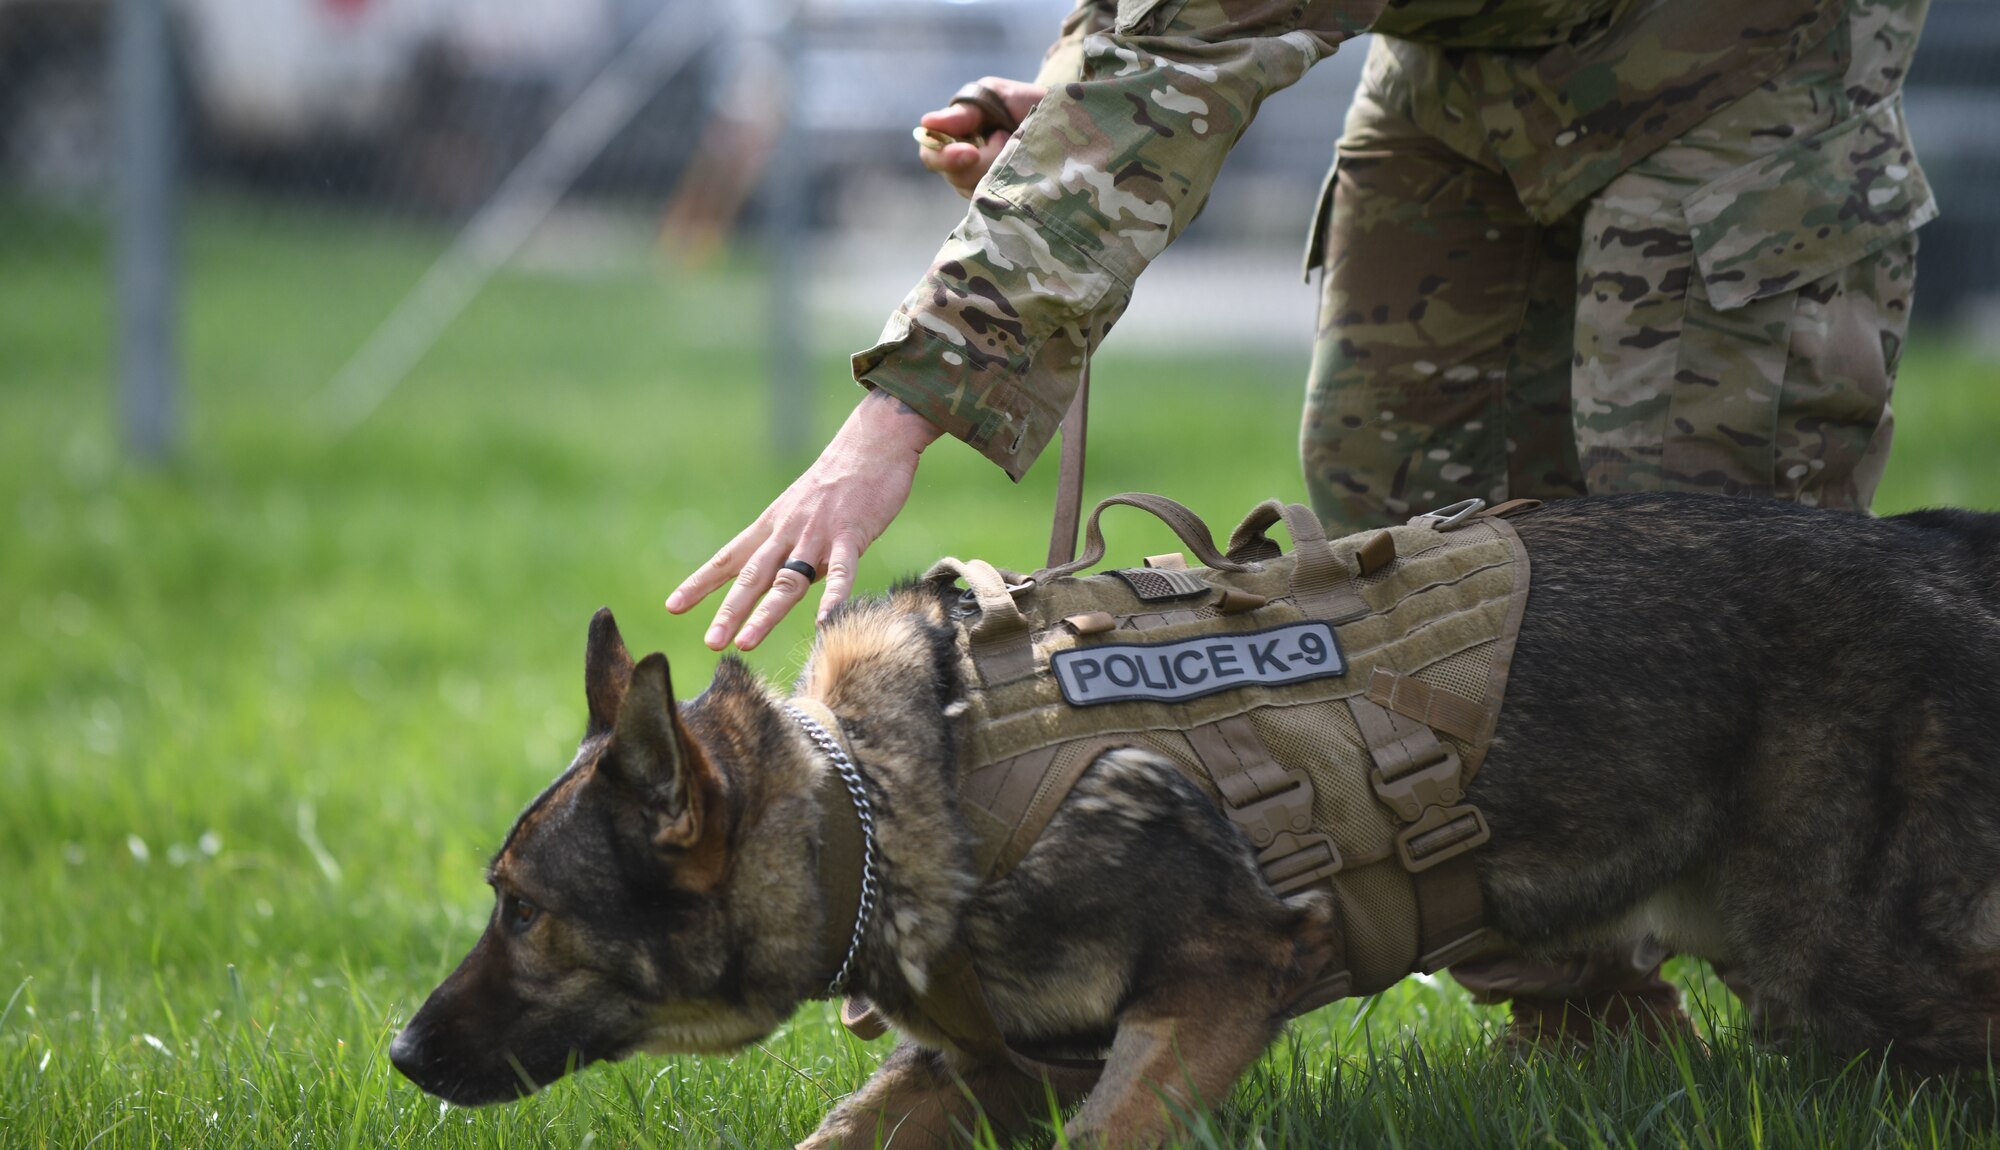 Boris, a 28th Security Forces Squadron military working dog, takes a defensive stance during a MWD demonstration in recognition of National Police Week at the 28th SFS K-9 Facility on Ellsworth Air Force Base, S.D., May 16, 2019. National Police Week is held in honor of the many law enforcement officers who have died while serving in communities nationwide. (U.S. Air Force photo by Airman 1st Class Christina Bennett)